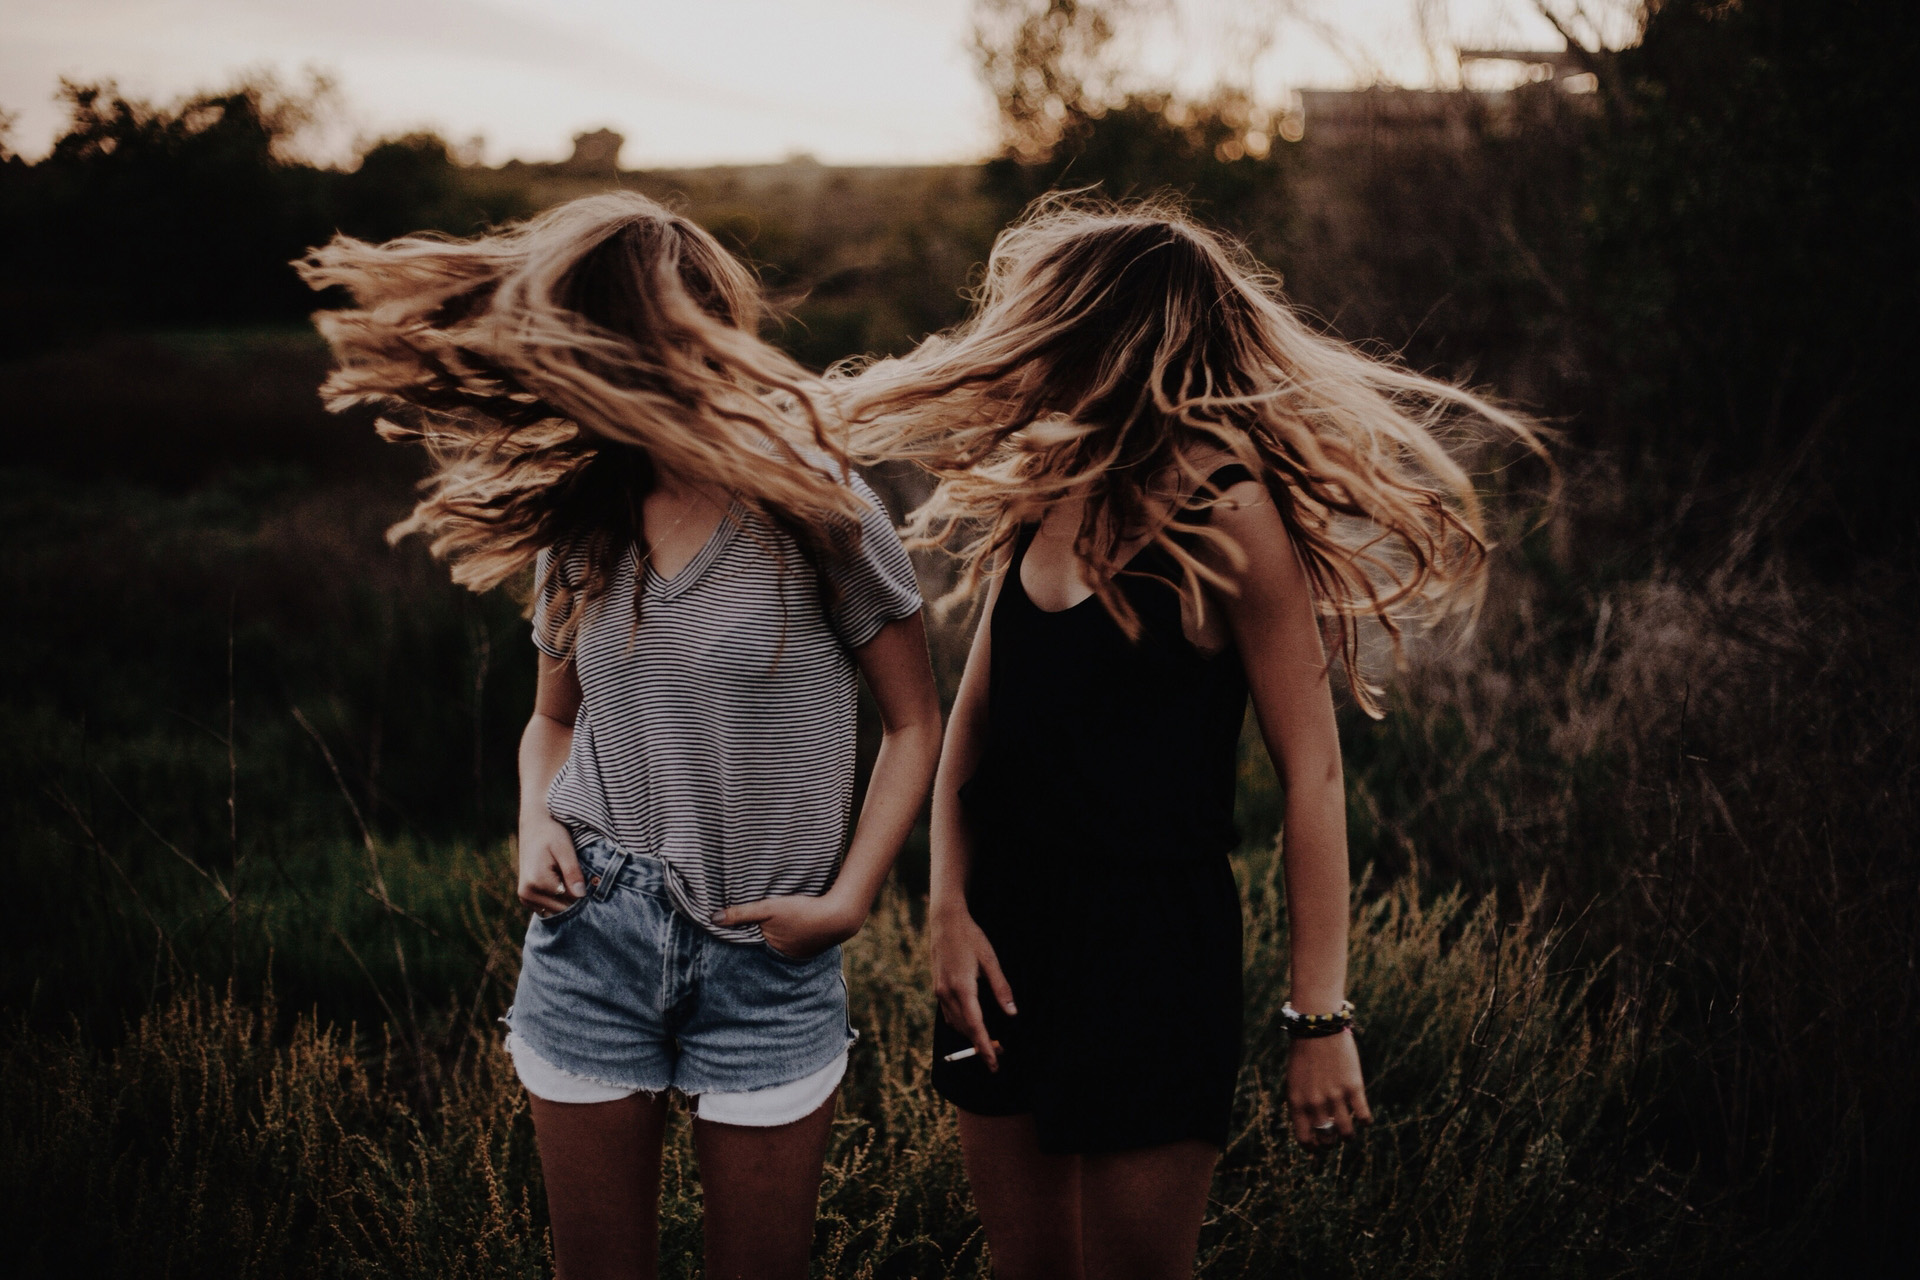 Two young women flicking their hair, dressed in Brandy Melville